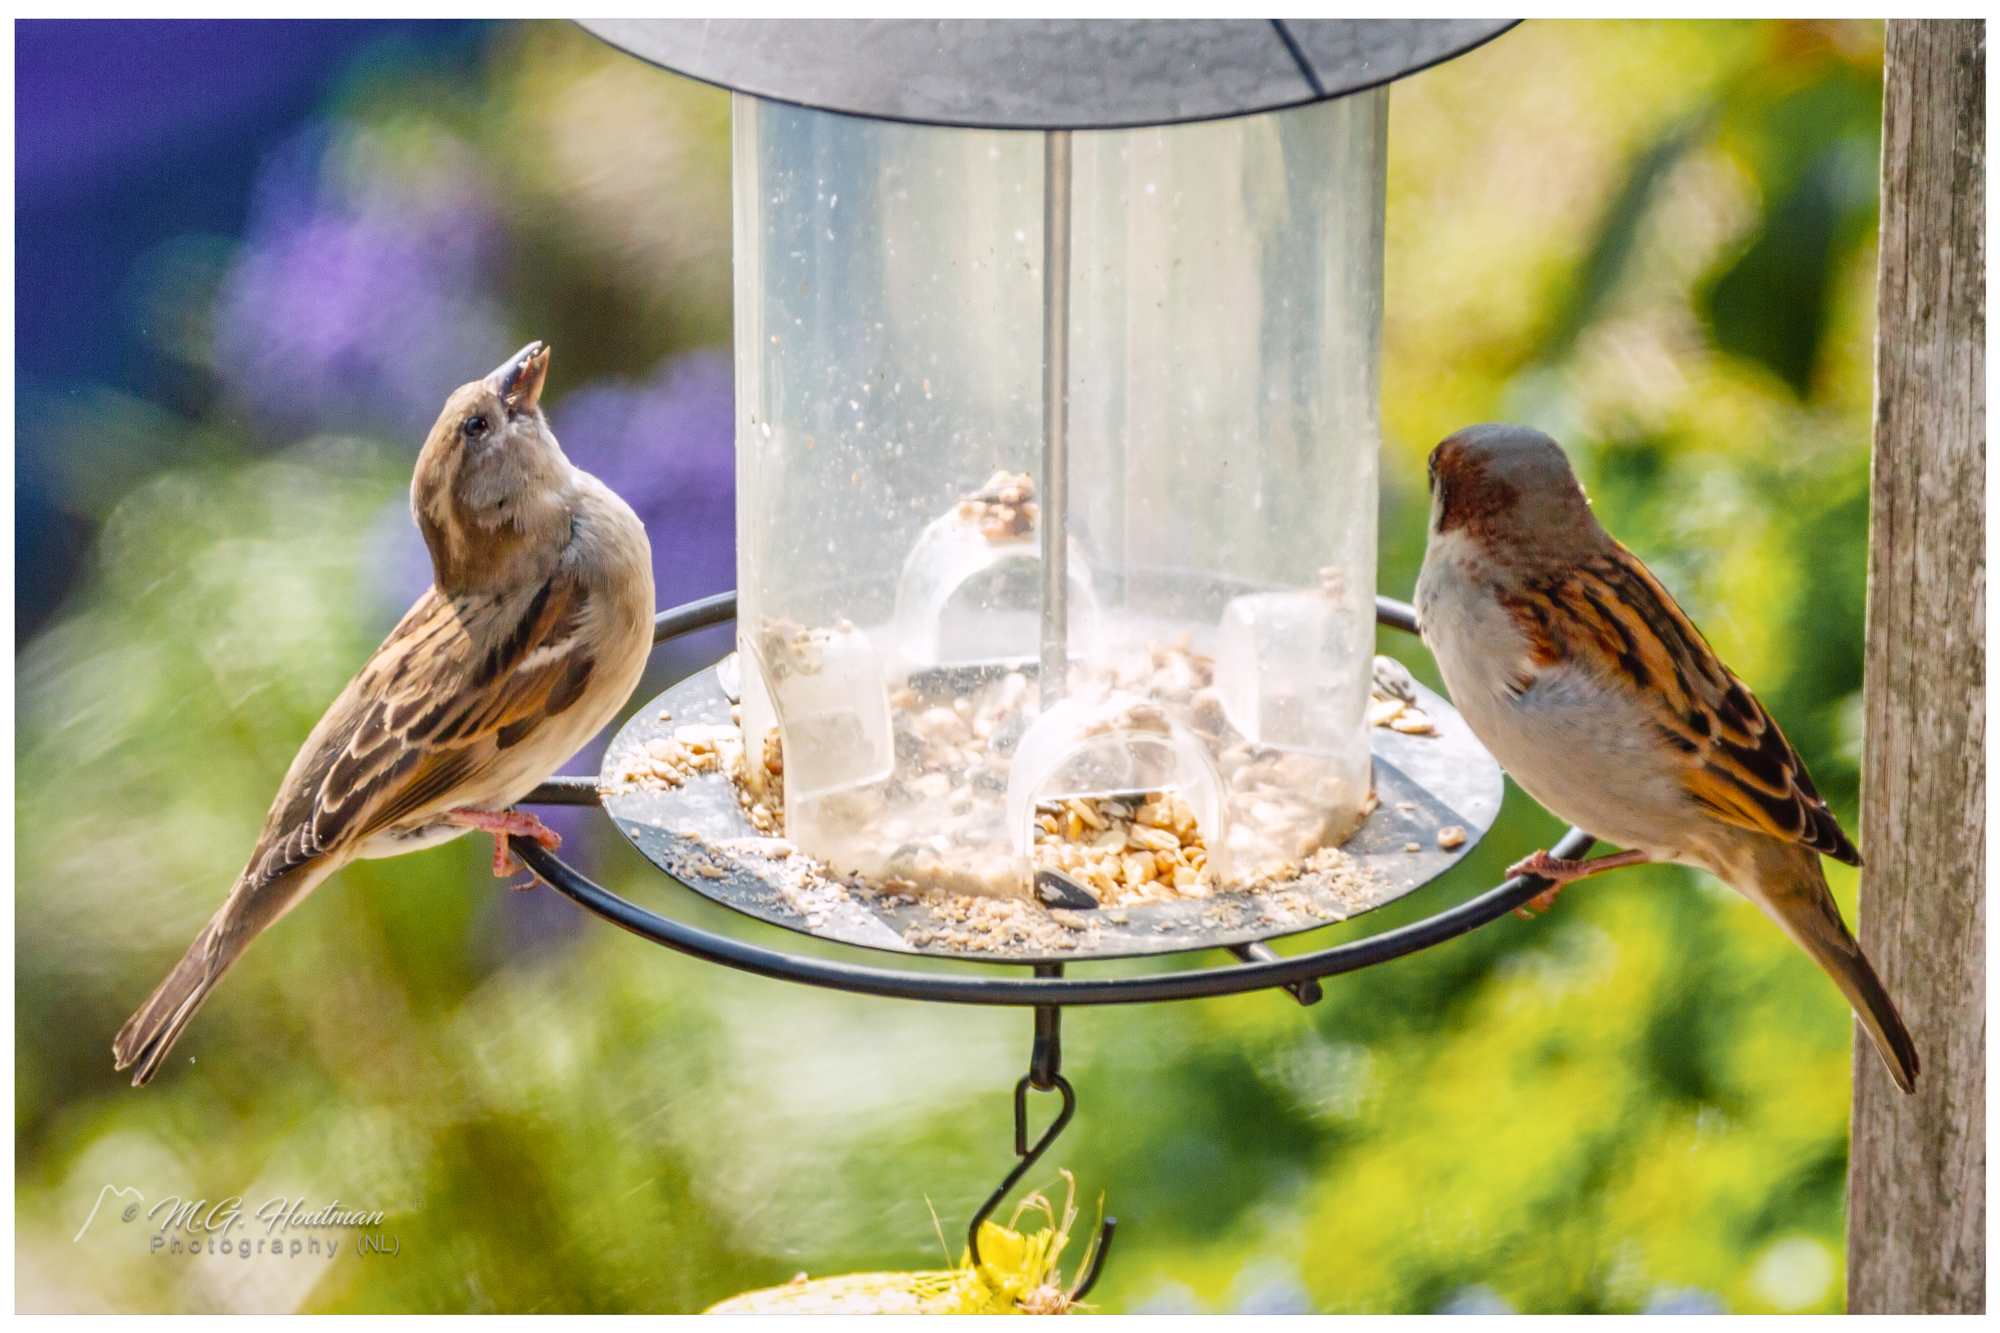 Two little sparrows at the spring meal